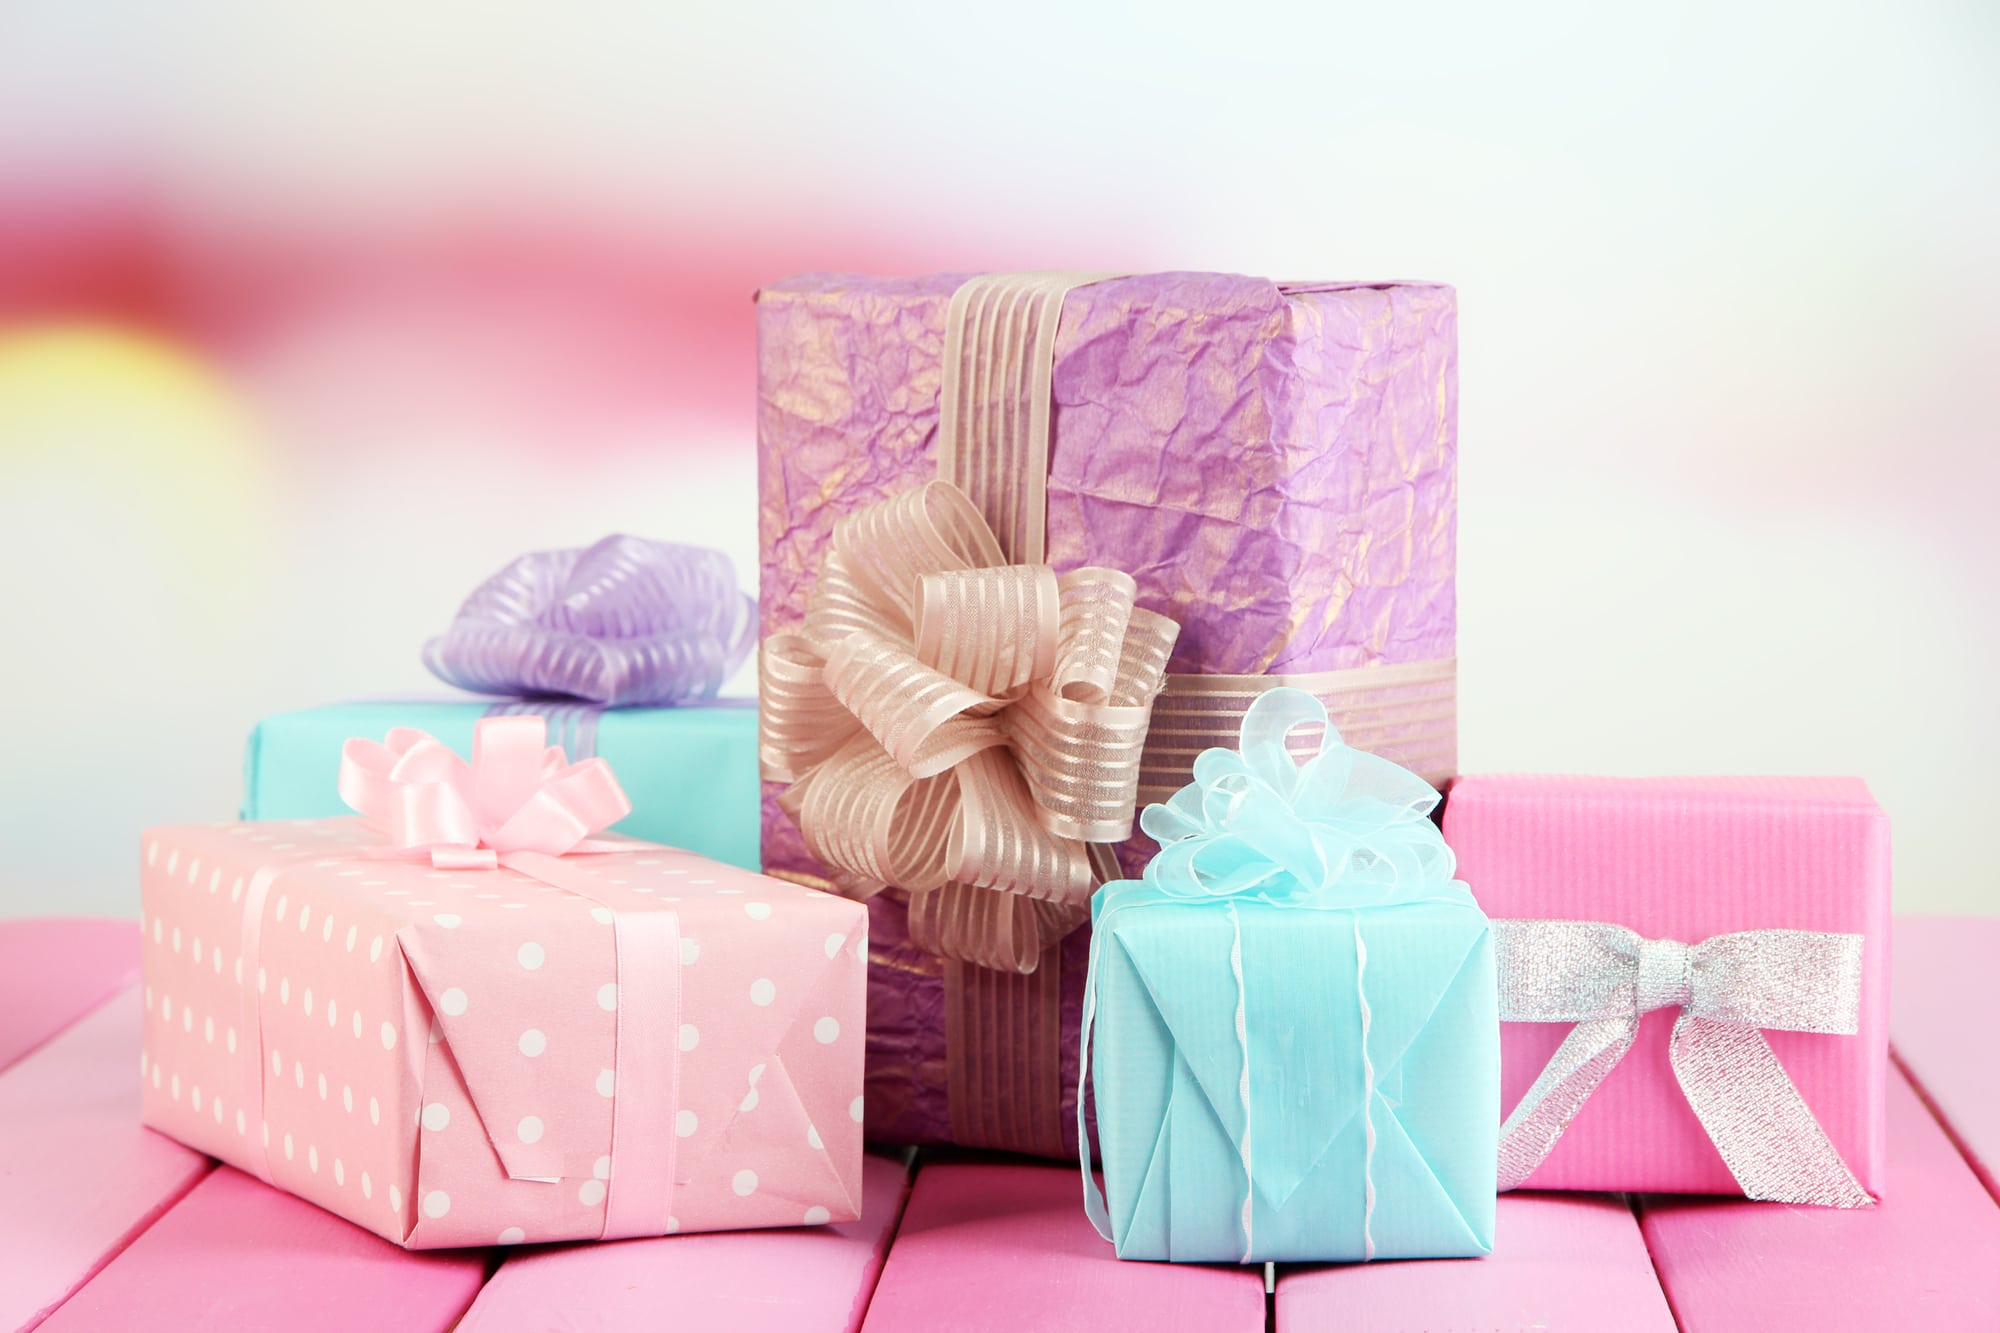 Places Where to Get Free Birthday Stuff That Will Make Your Day More Special 